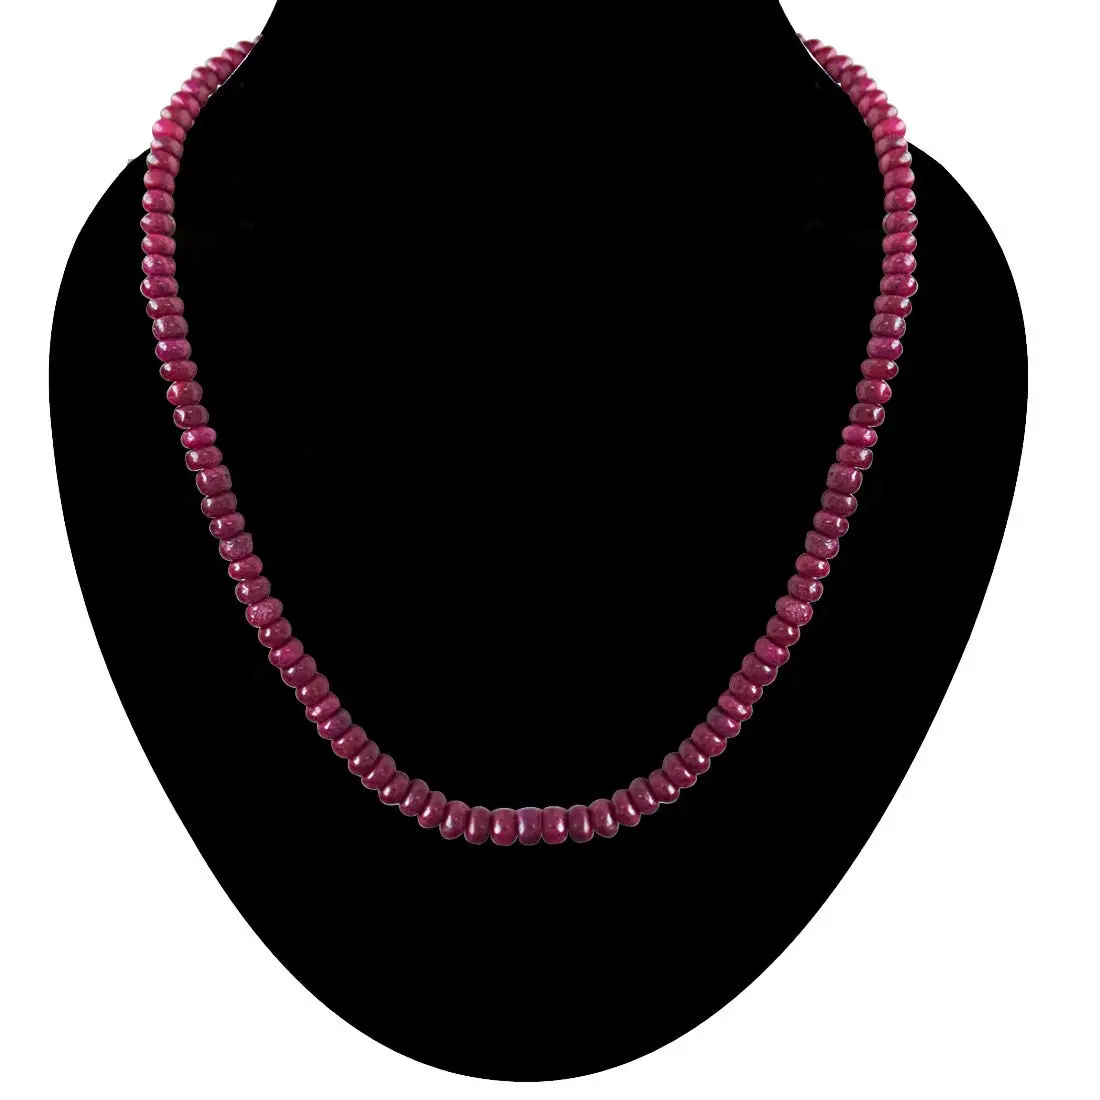 124cts Single Line Real Reddish Pink Ruby Beads Necklace for Women (124ctsRubyNeck)